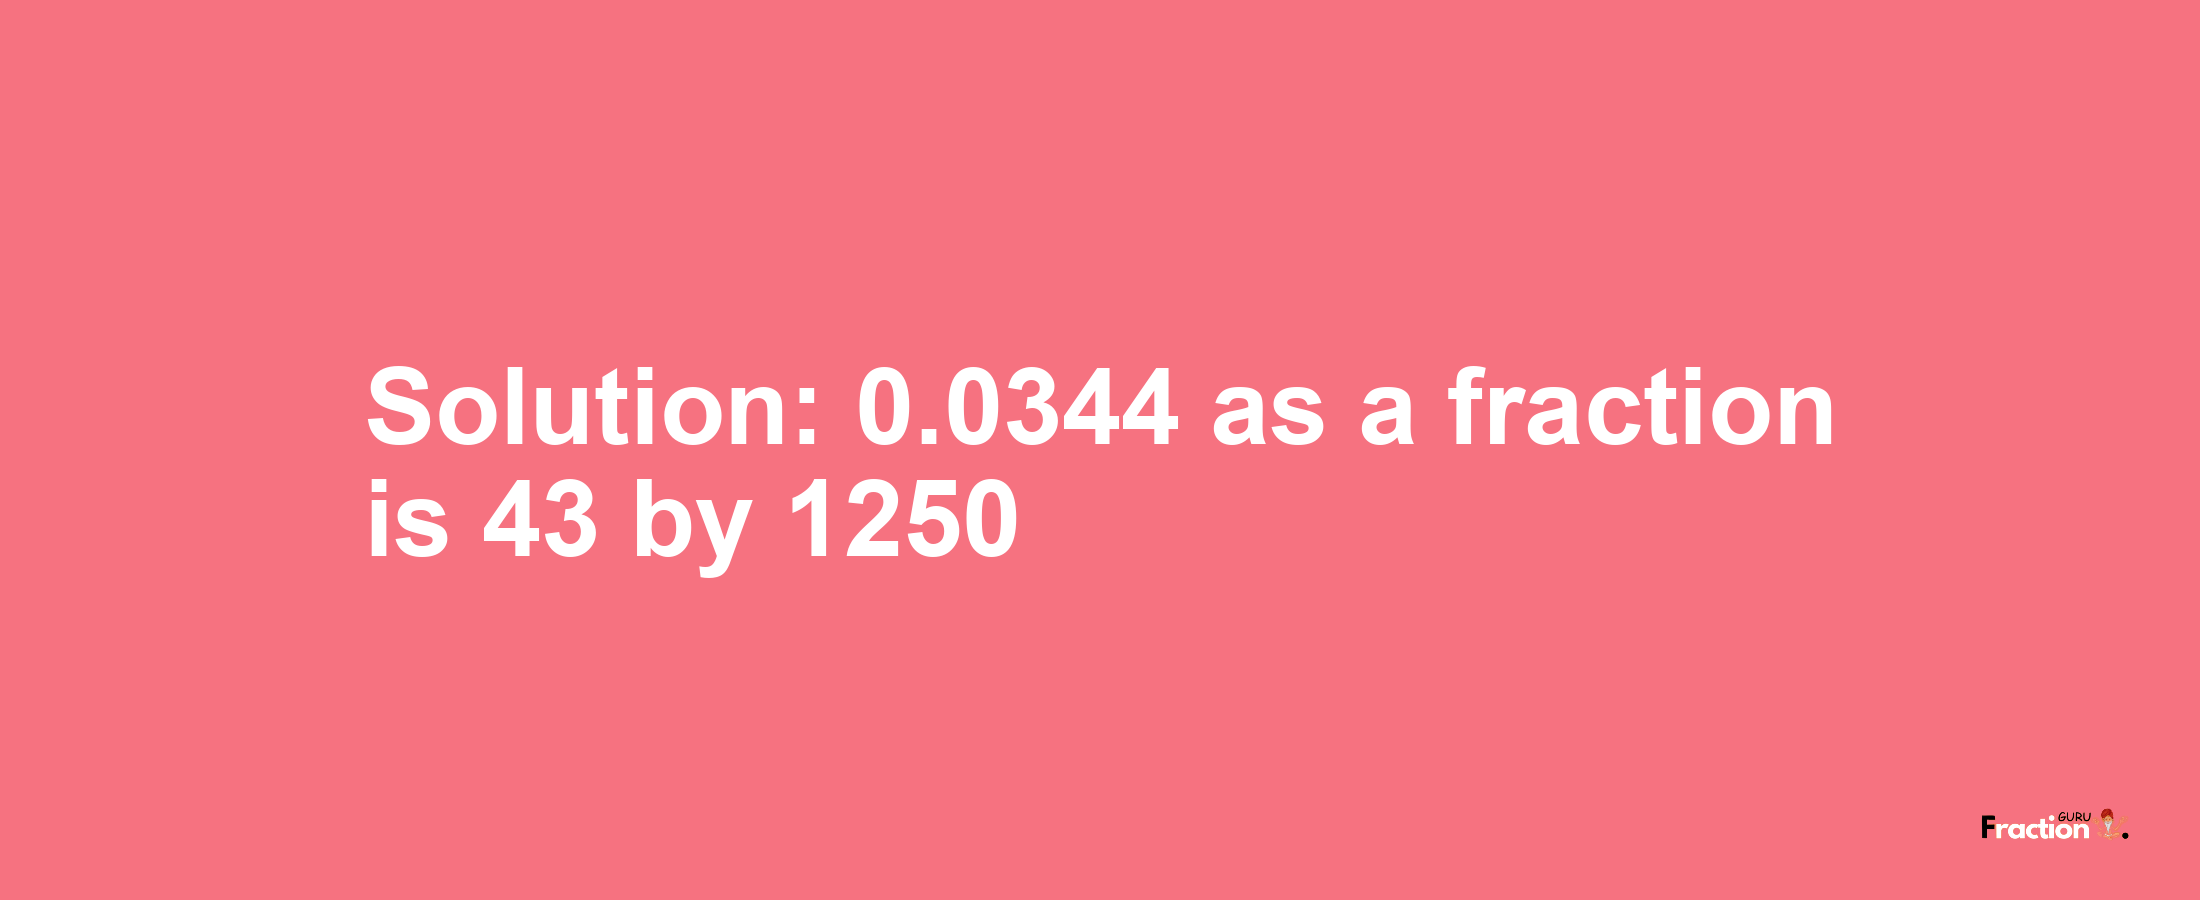 Solution:0.0344 as a fraction is 43/1250